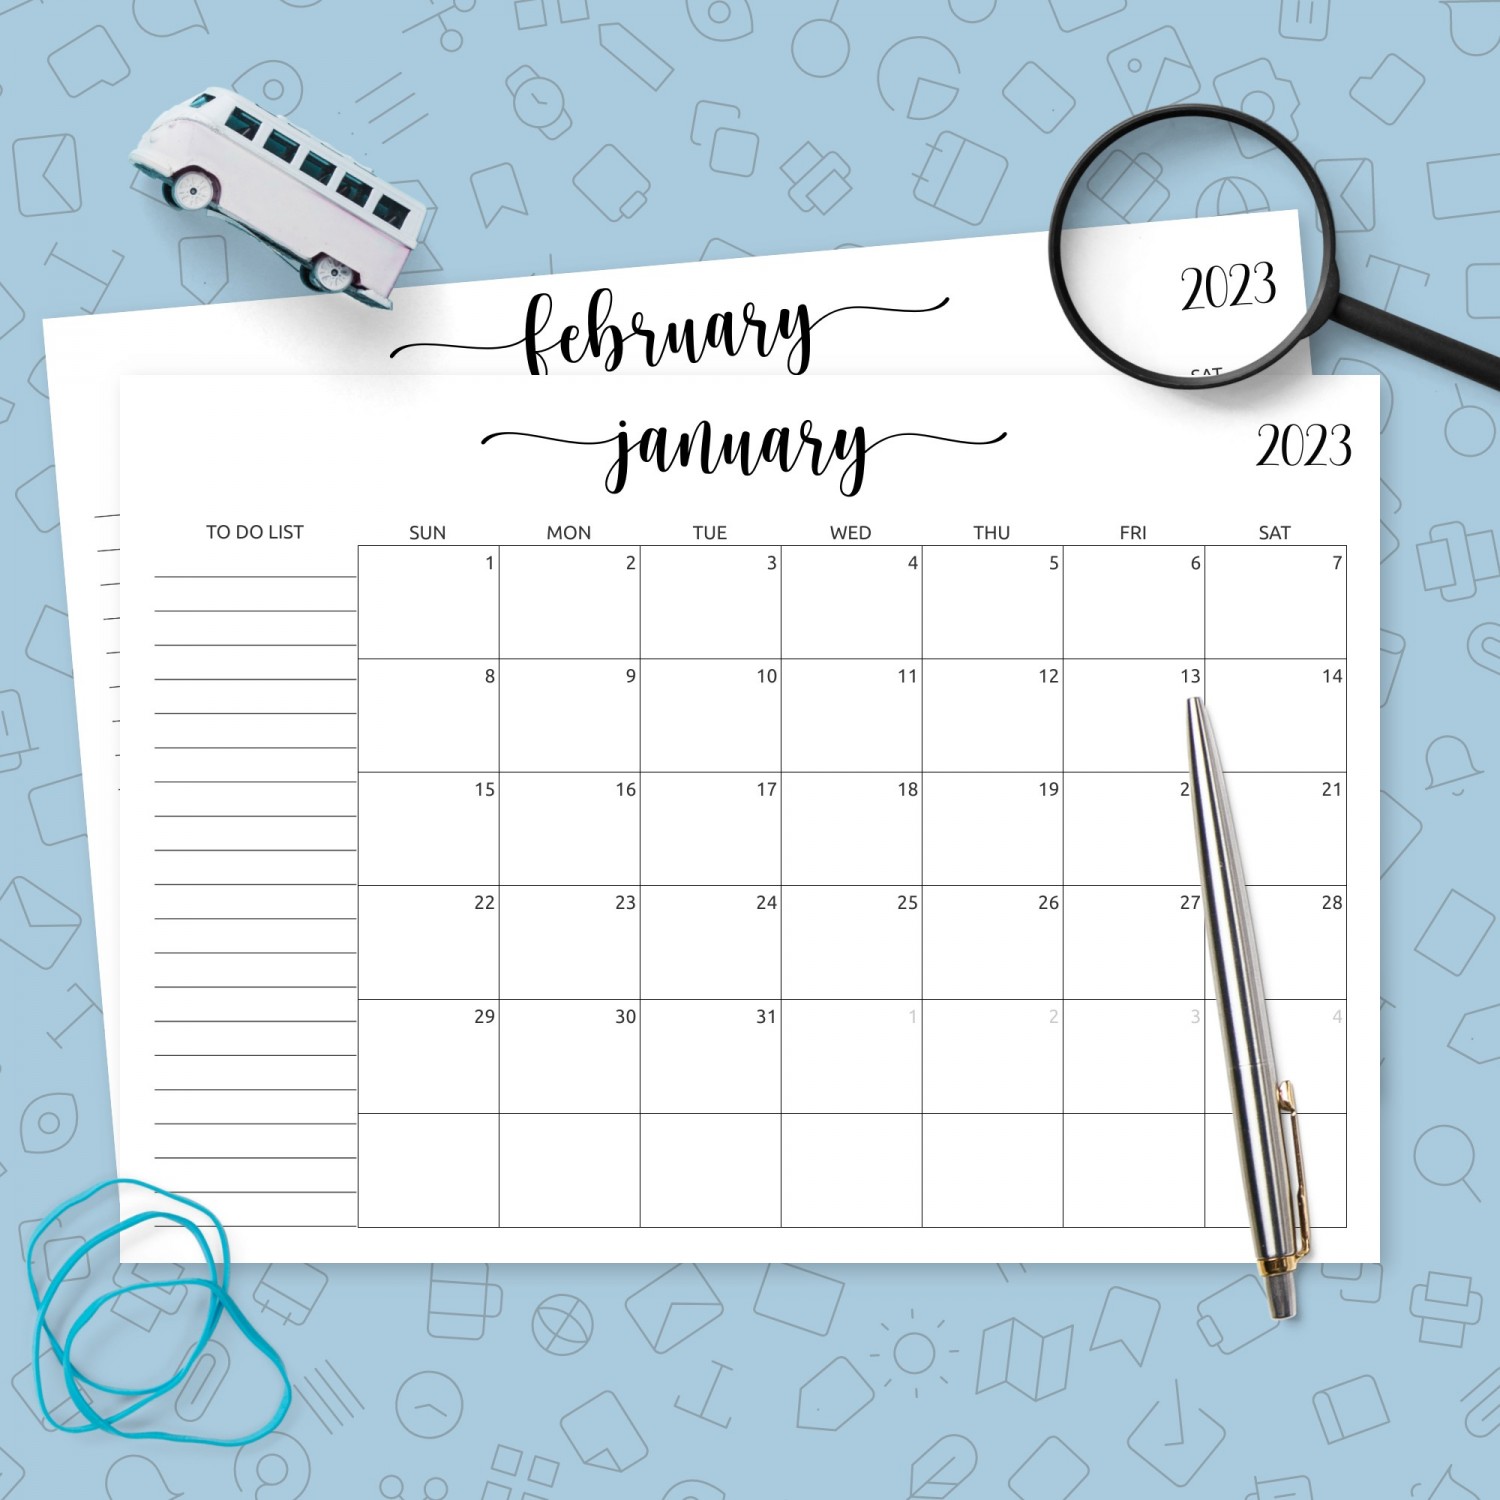 Monthly Calendar with To-Do List Template